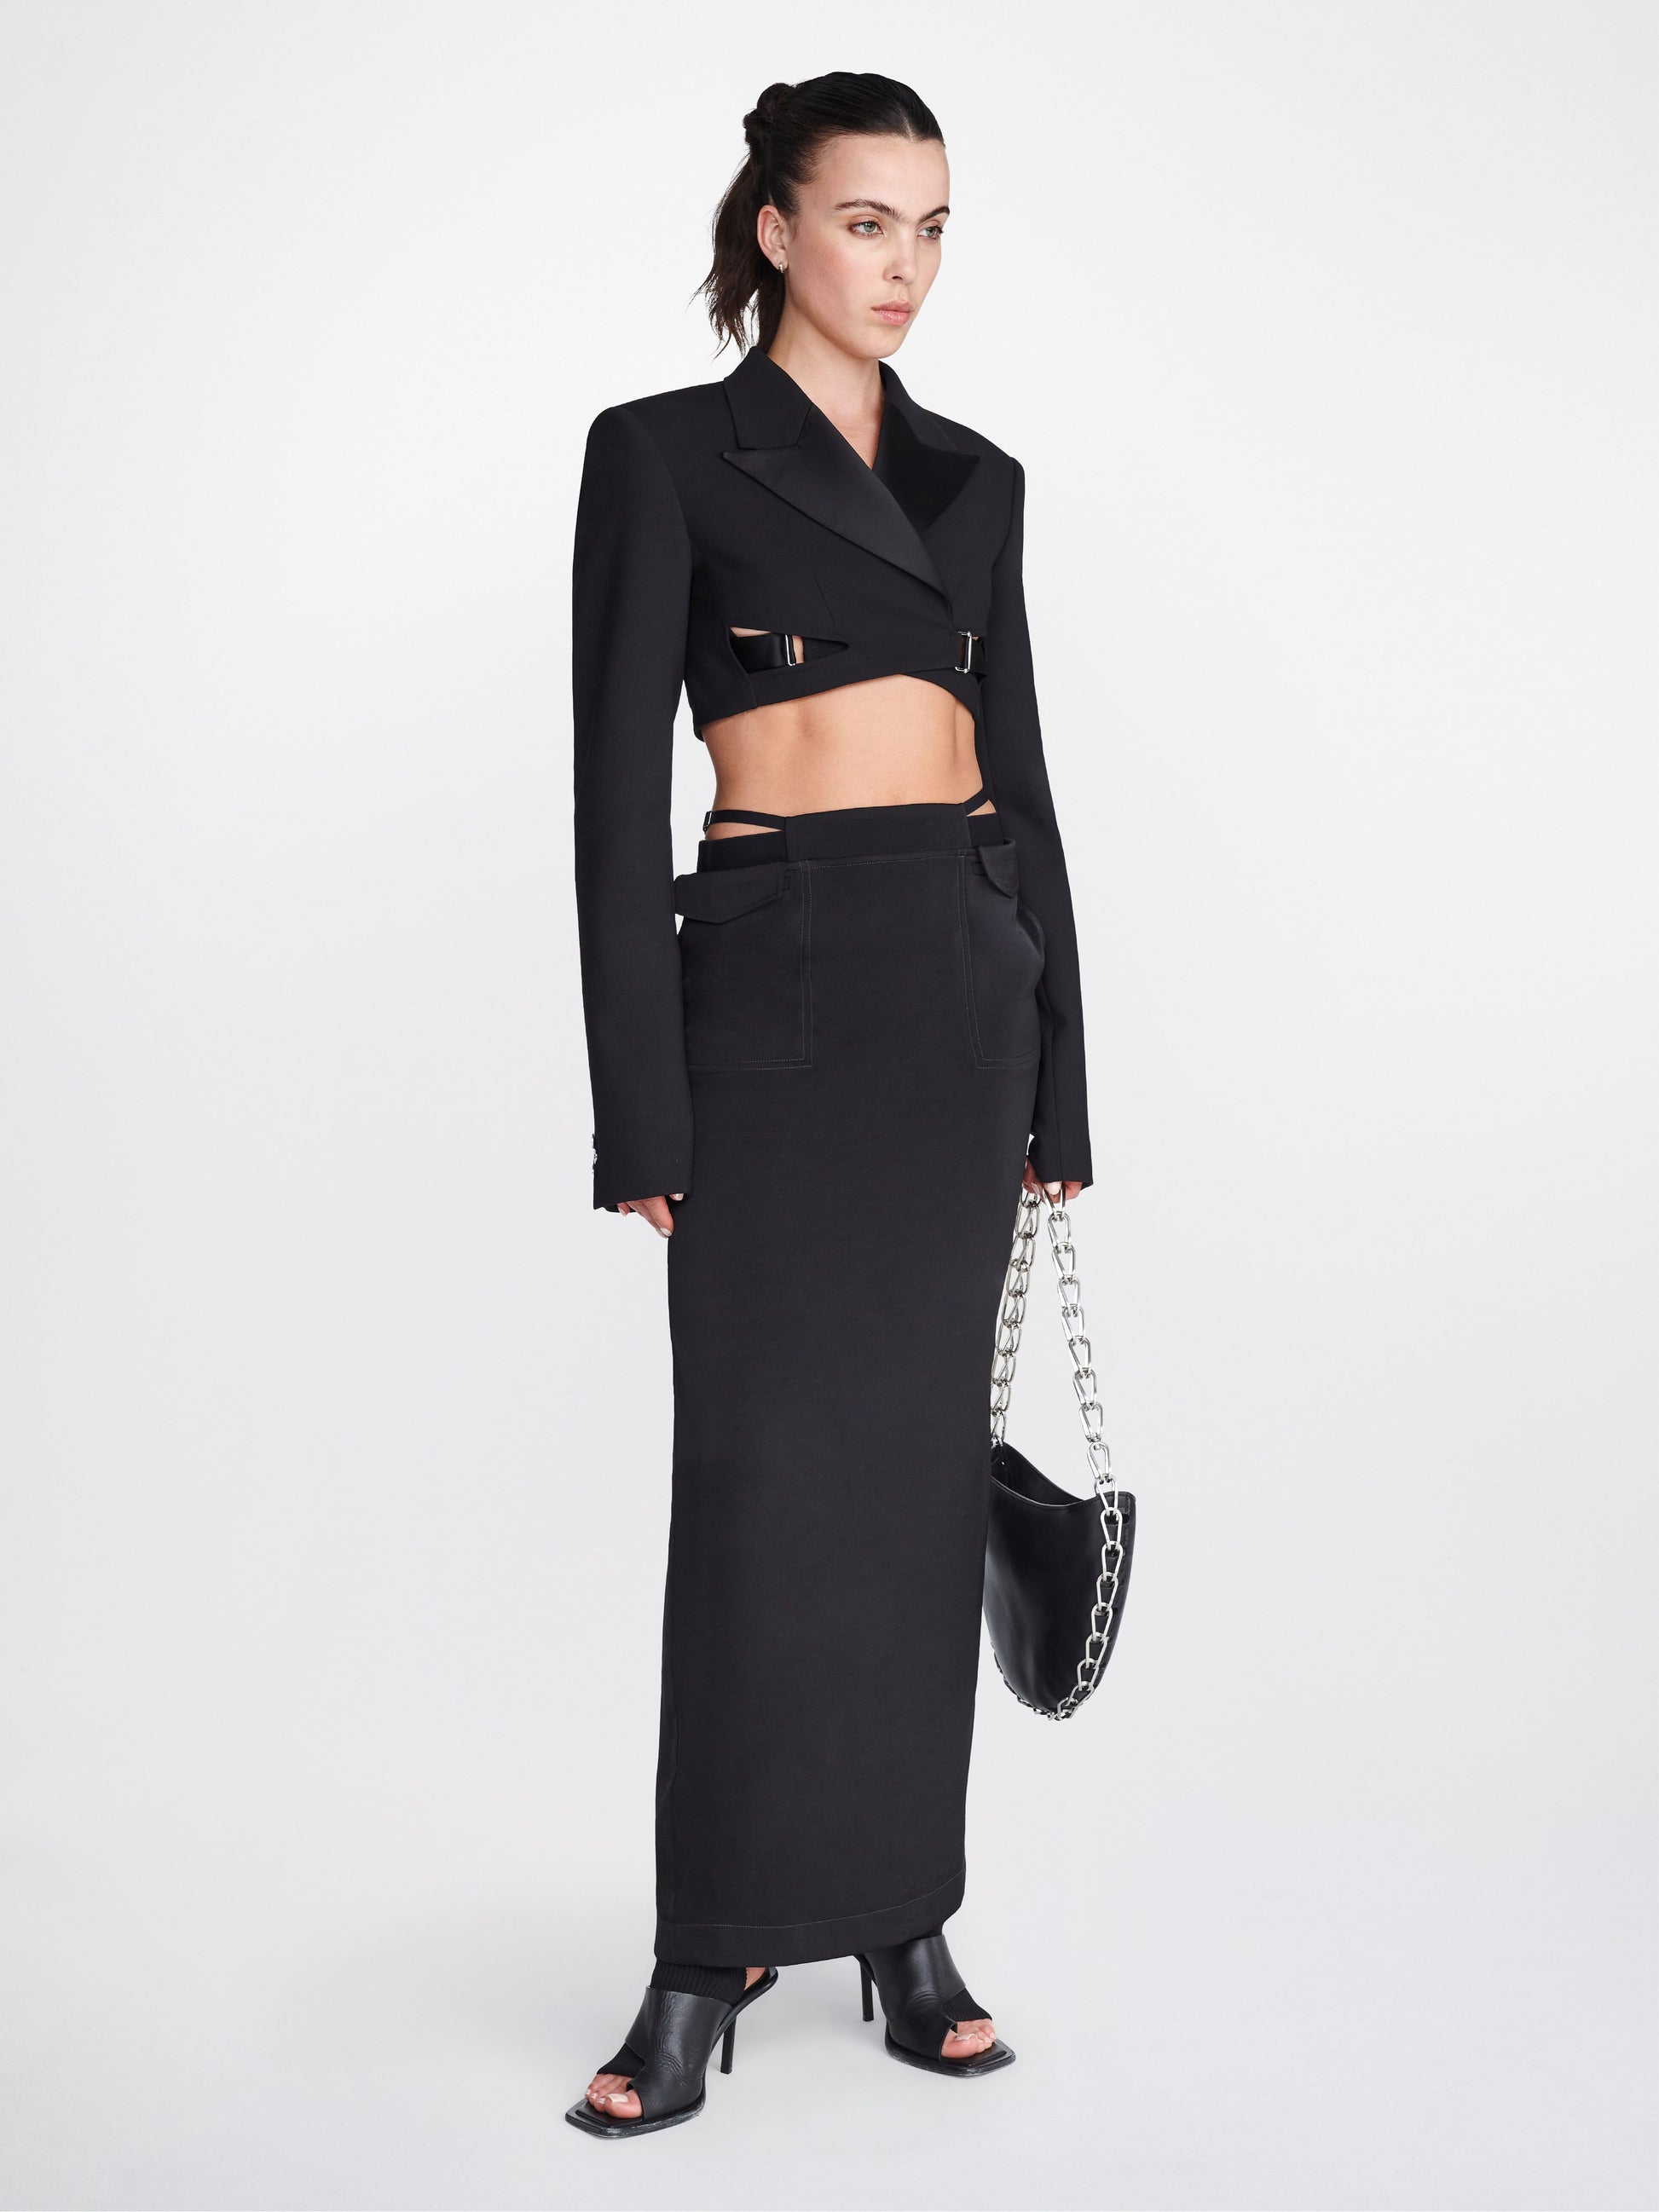 The Dion Lee Pocket Column Skirt in Black available at The New Trend Australia